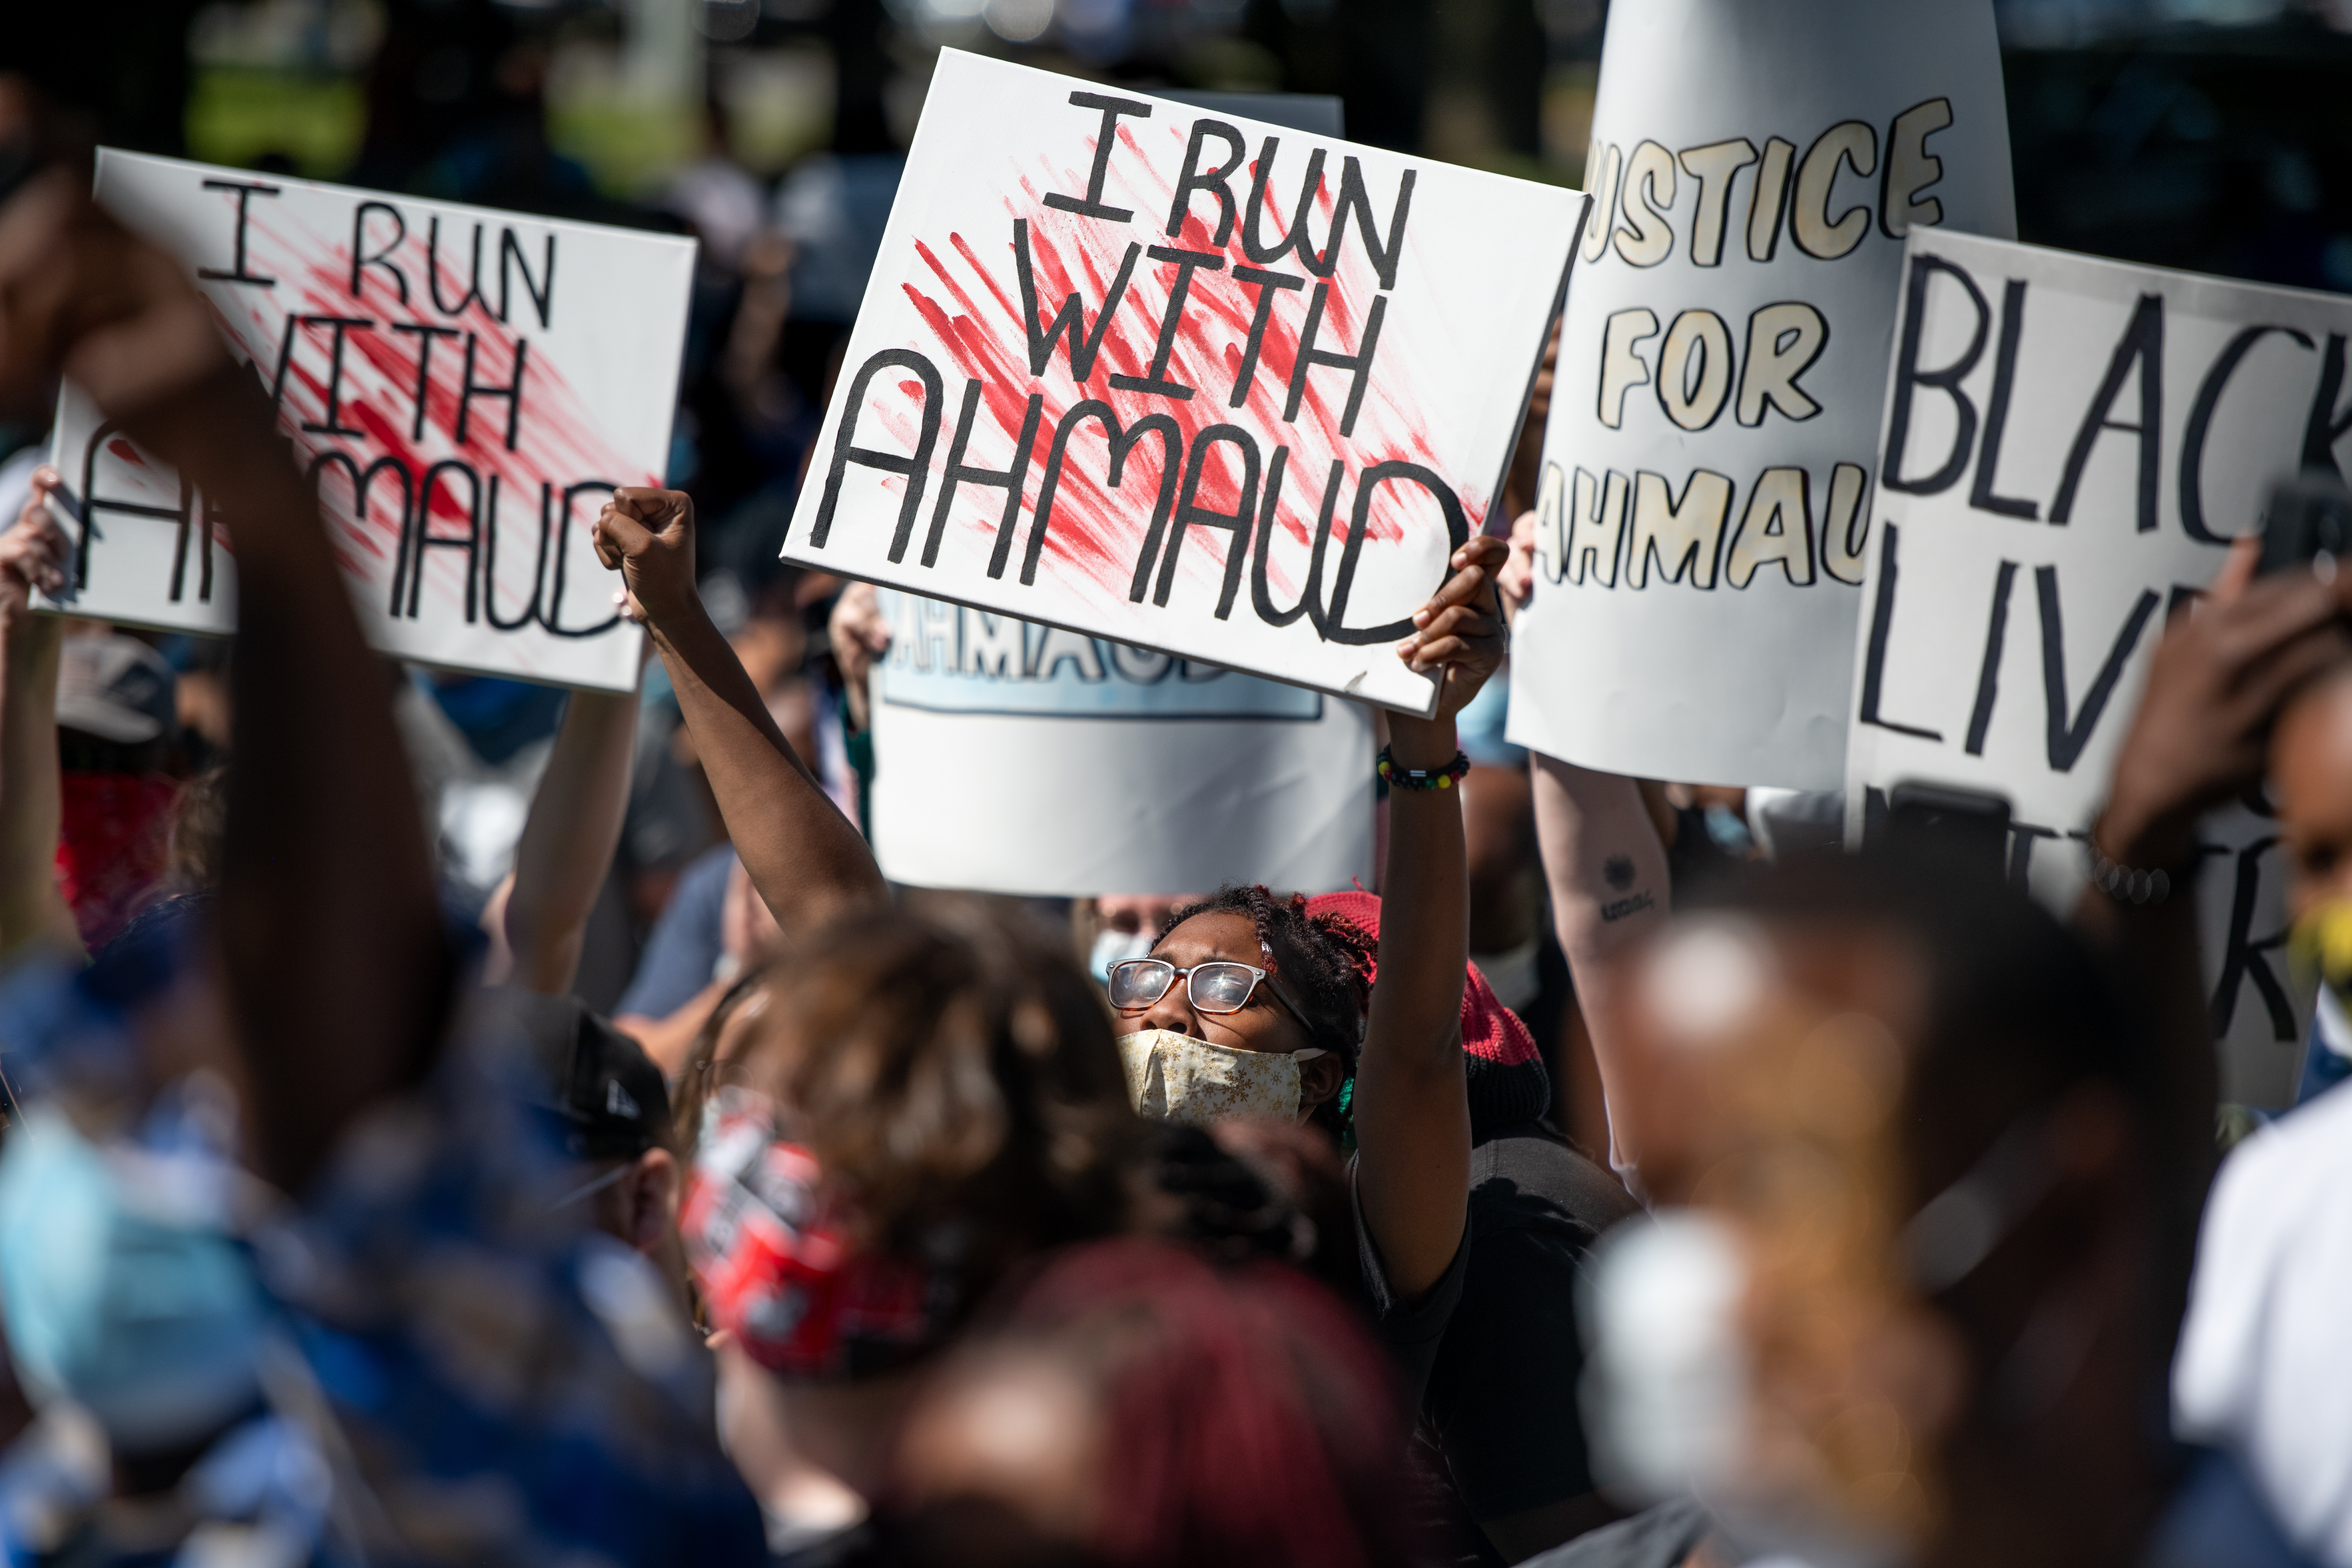 Demonstrators on May 8 protest the shooting death of Ahmaud Arbery at the Glynn County Courthouse in Brunswick, Georgia.